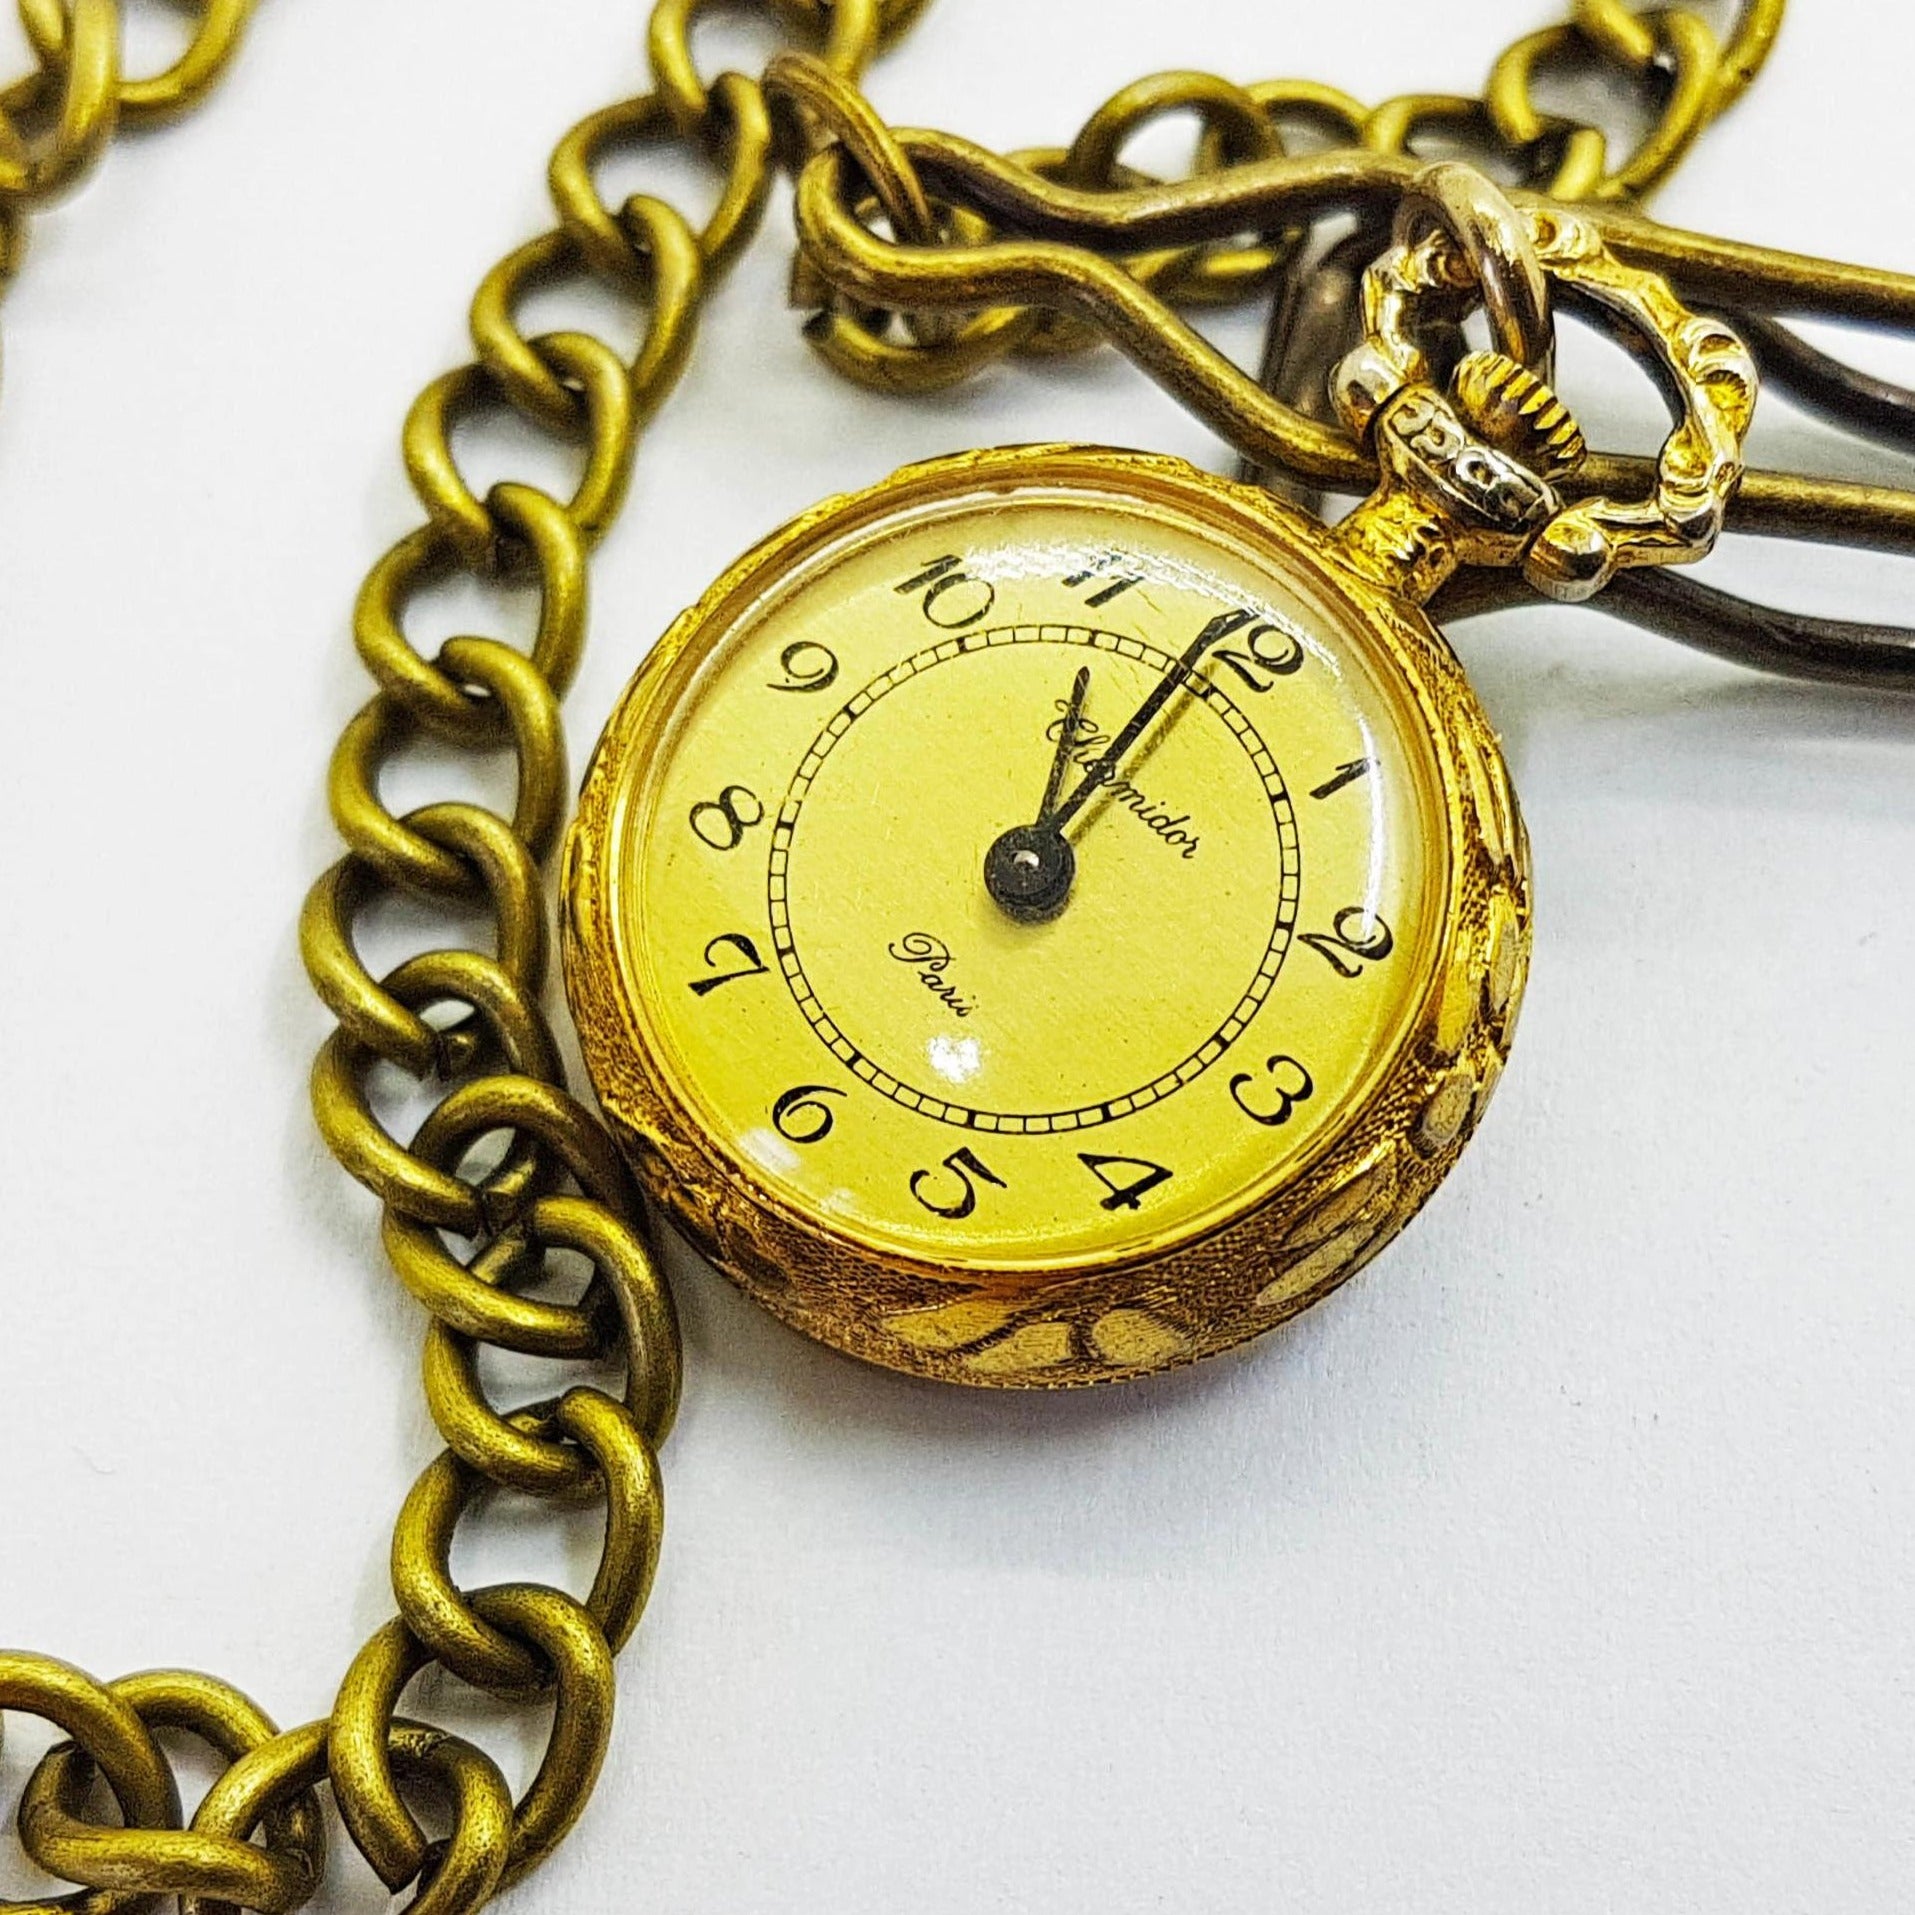 Thermidor Paris Pocket Watch | Luxury French Pocket Watch Collection ...